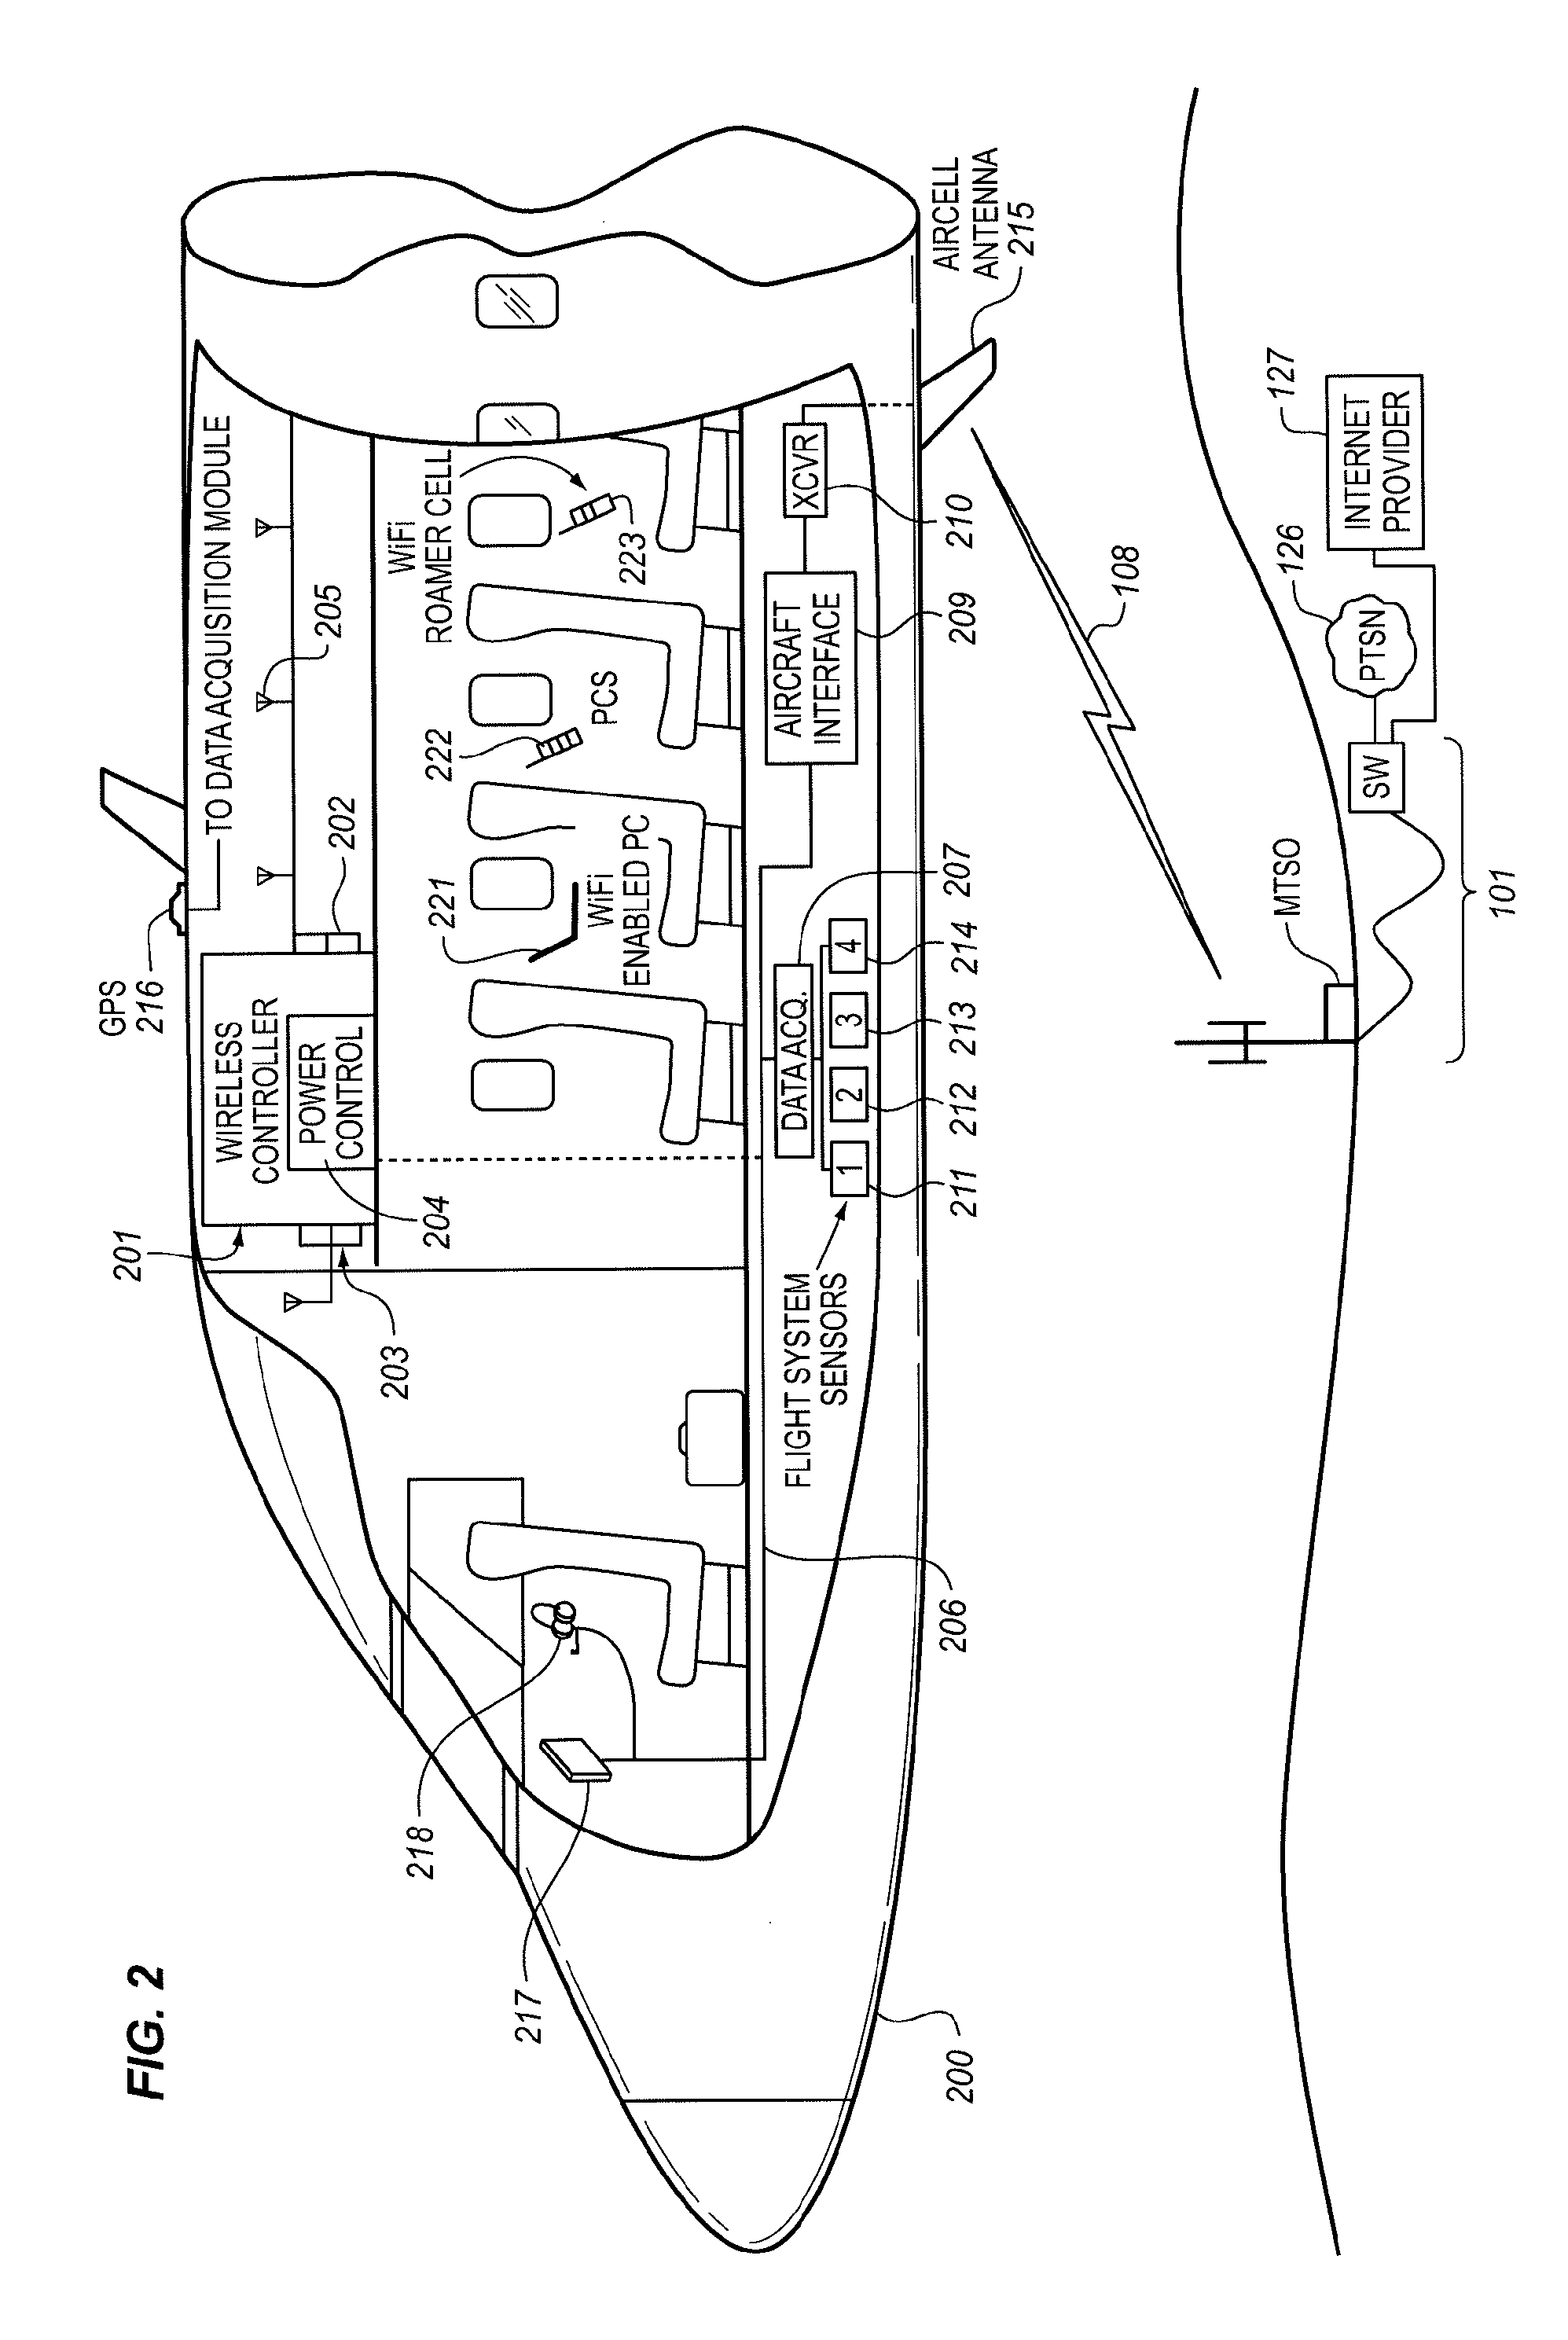 System for customizing electronic services for delivery to a passenger in an airborne wireless cellular network